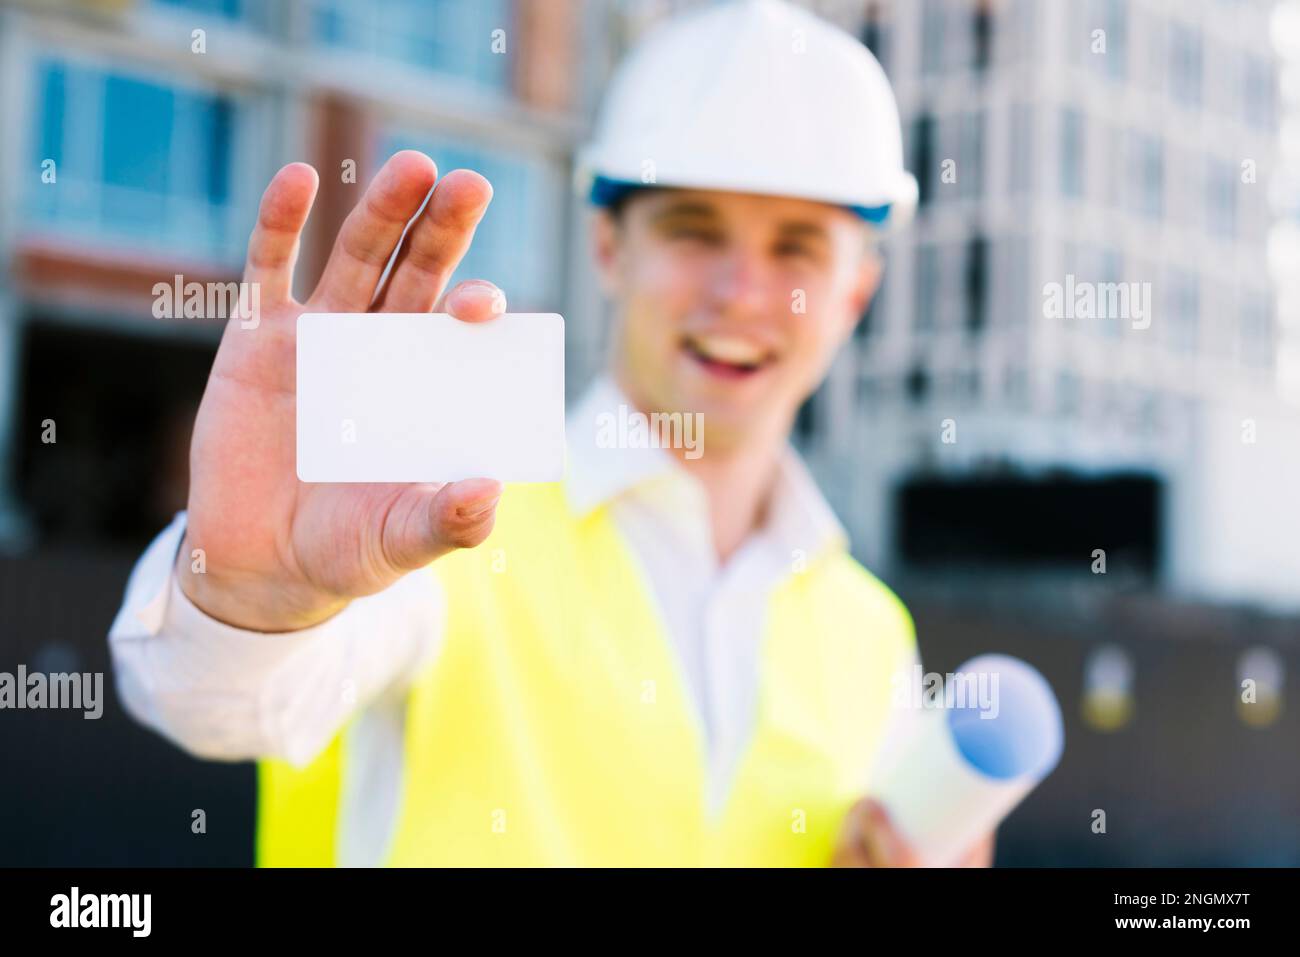 medium shot smiley man with business card Stock Photo